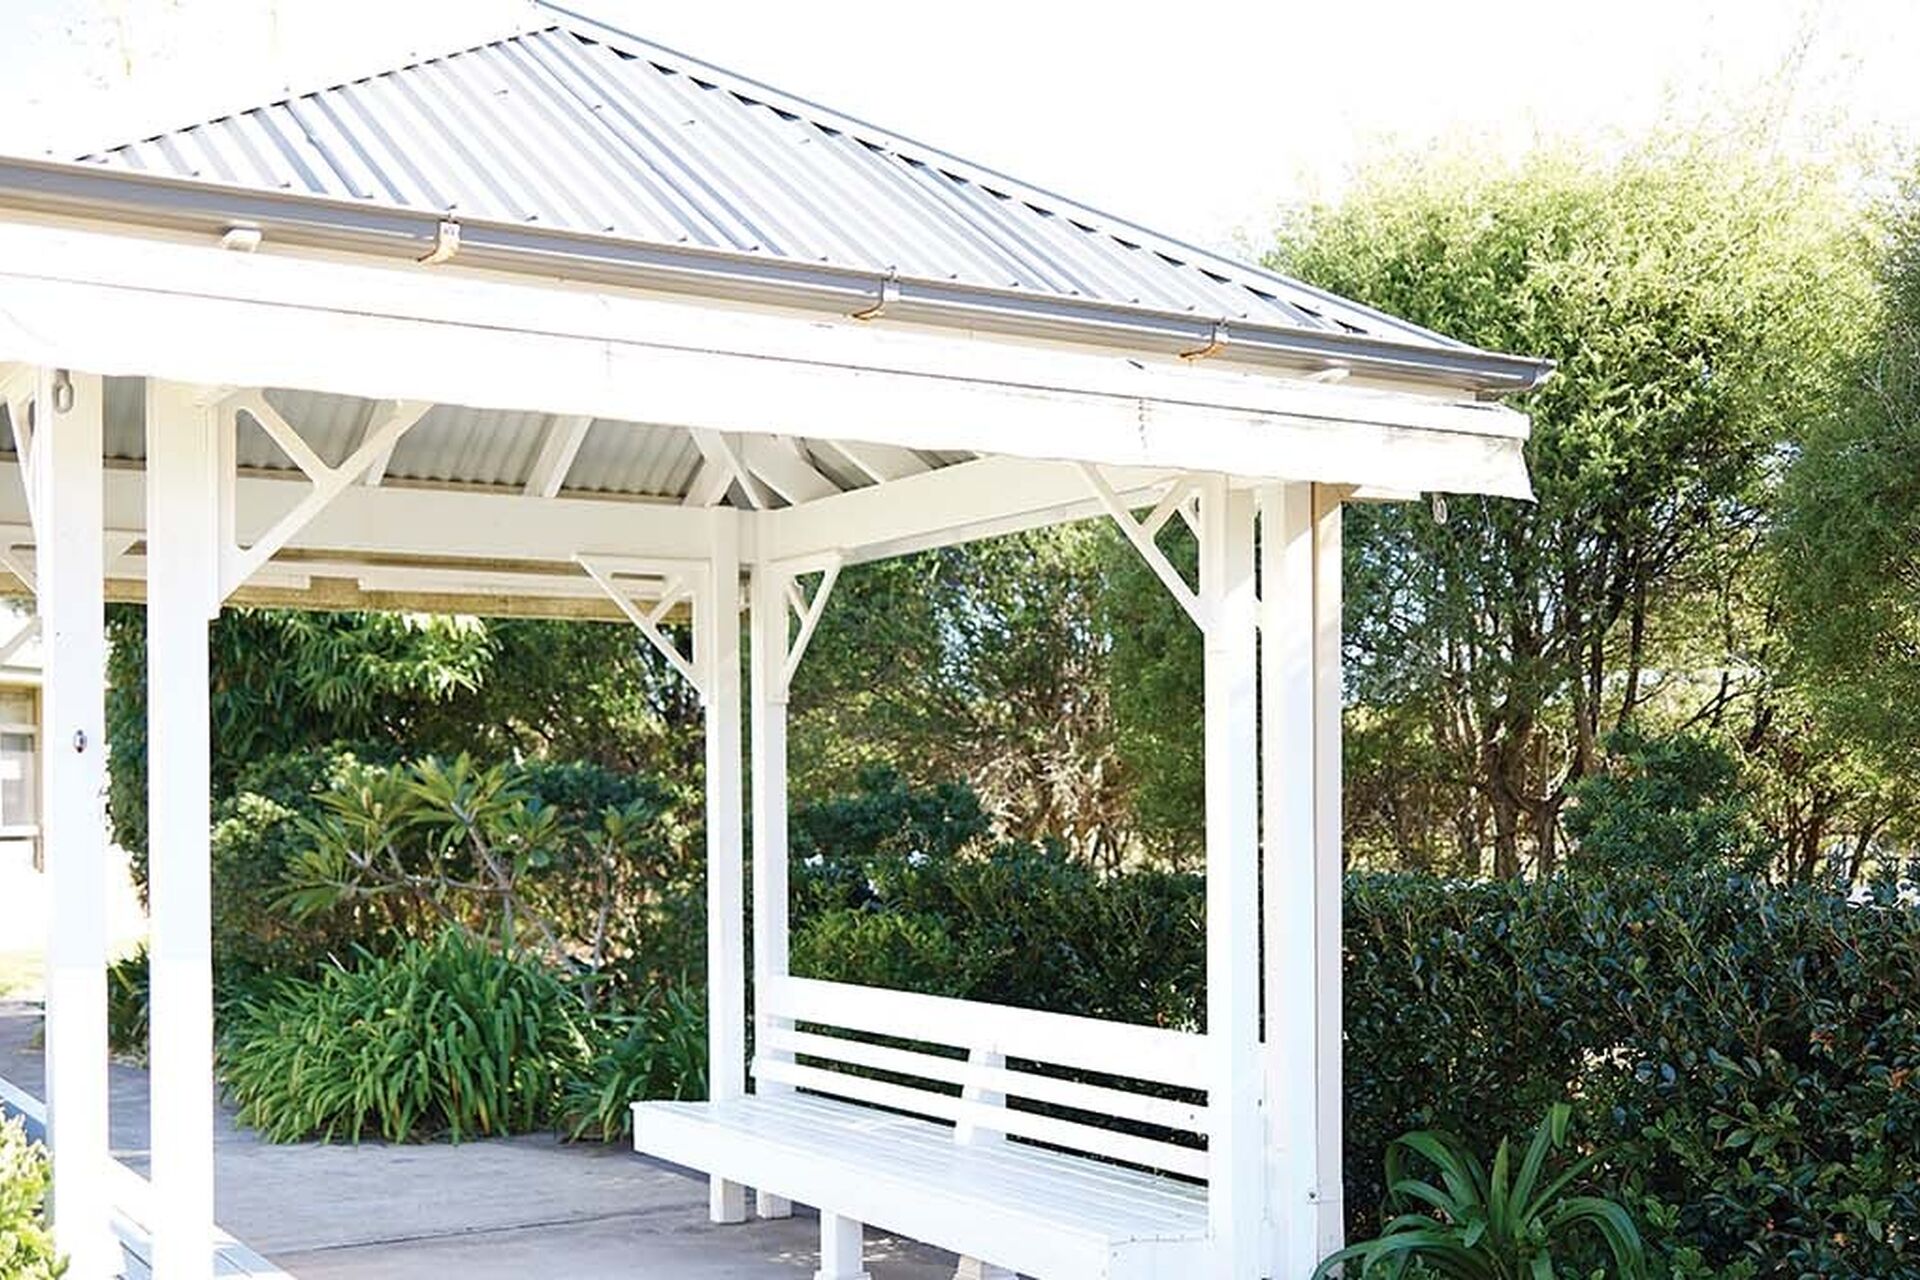 white gazebo for aged care nursing home residents to enjoy at baptistcare bethshan gardens centre aged care home in wyee nsw